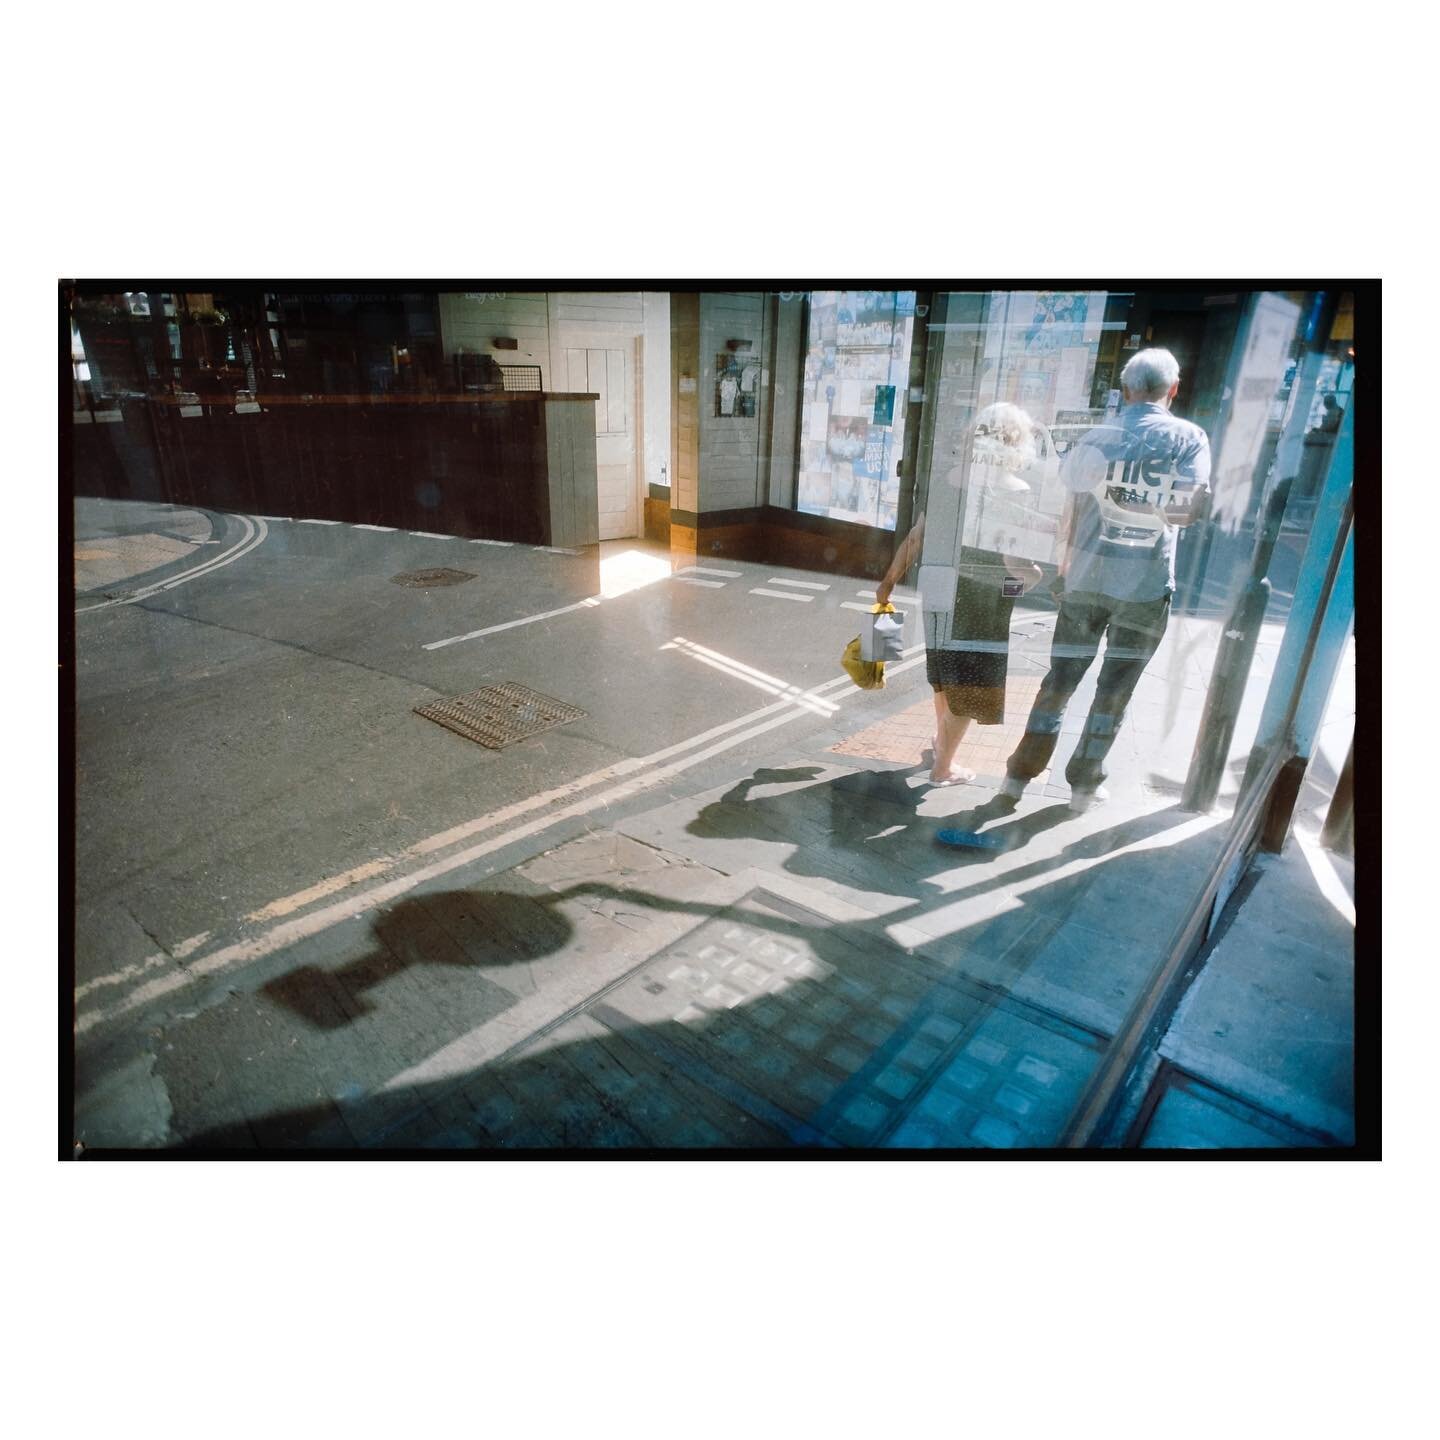 Ghostly Visitors to a Missing Cafe

#nikonf2 #portra160 #sublimestreet #streetizm #streetsgrammer #street_avengers #urbanstreetphotogallery #streetfinder #minimal_streetphoto #streethunters #eyeshotmag #streets_storytelling #lensculturestreets #thest